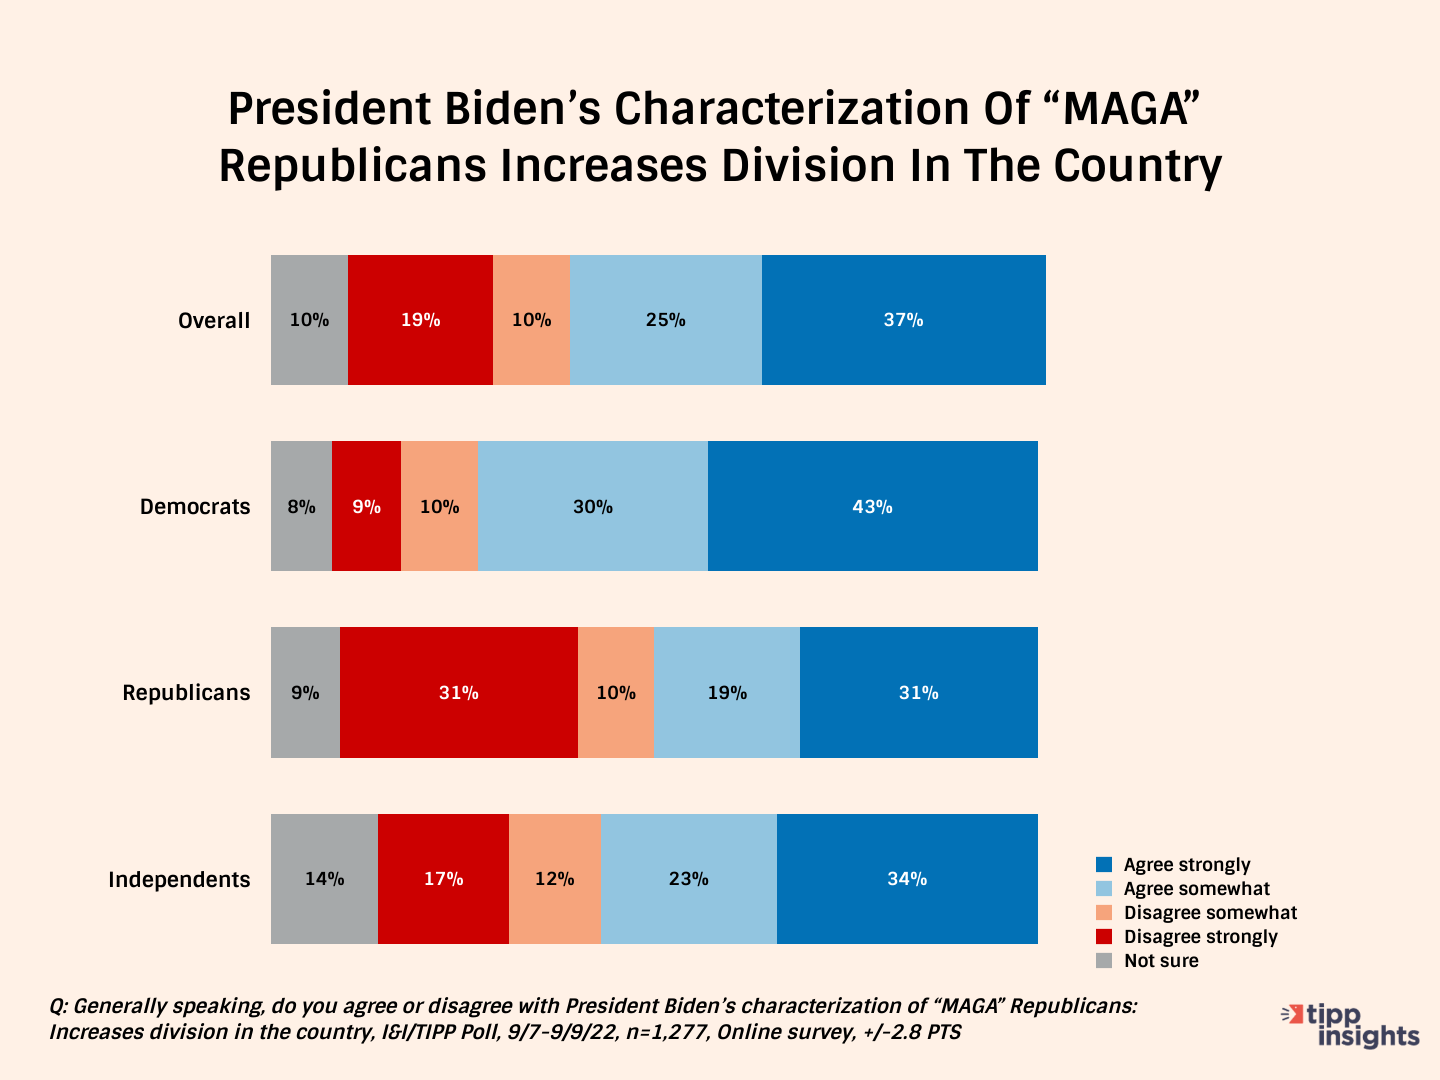 I&I/TIPP Poll results 9/7-9/9/22: Chart showing whether or not President Biden's characterization of "MAGA" Republicans increases division in the United States